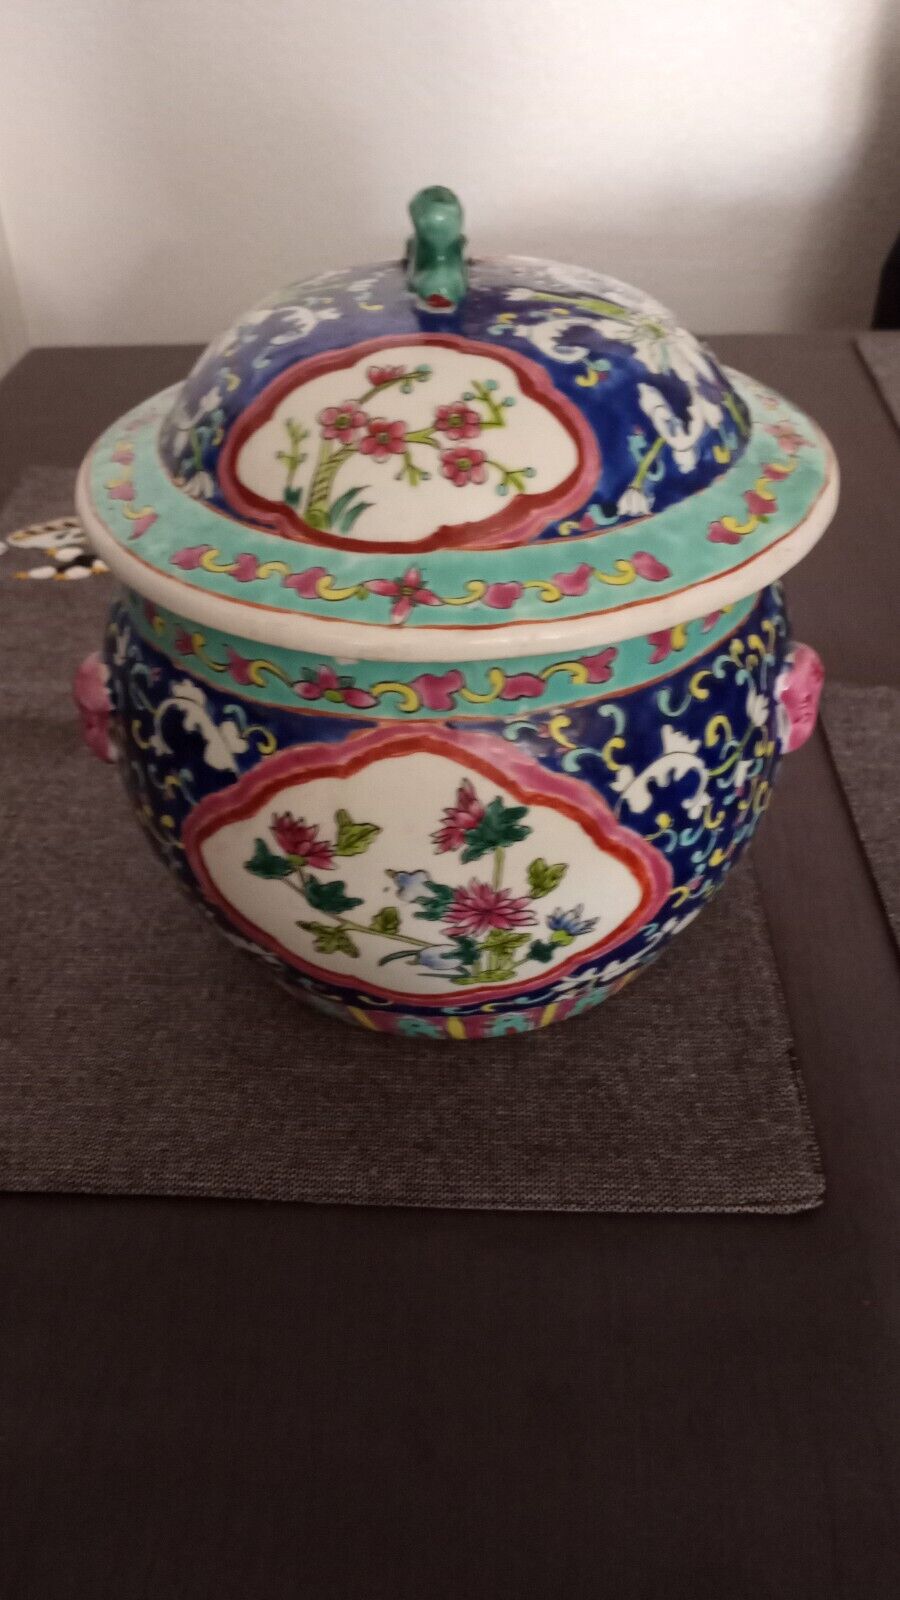 CHINESE  LIDDED JAR (KAMCHENG) ENAMELED THICK PORCELAIN WITH PEONY FLOWERS